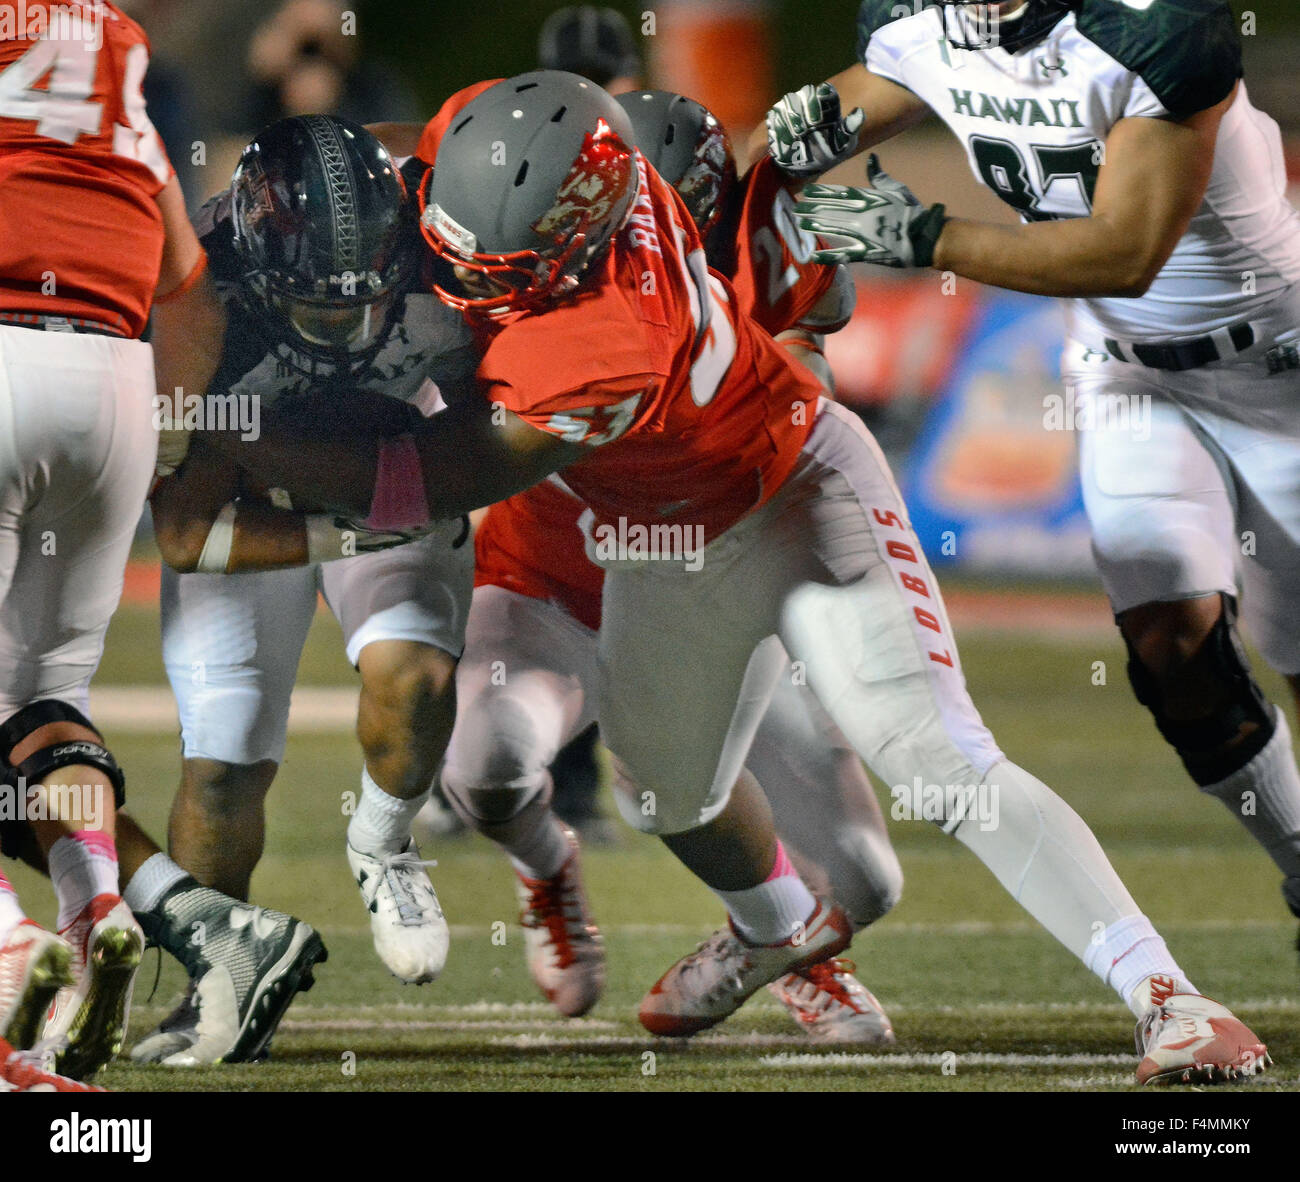 Albuquerque, NM, USA. 17th Oct, 2015. UNM's #53 Cody Baker wraps up the ball carrier in their game against Hawaii. Saturday, Oct. 17, 2015. © Jim Thompson/Albuquerque Journal/ZUMA Wire/Alamy Live News Stock Photo